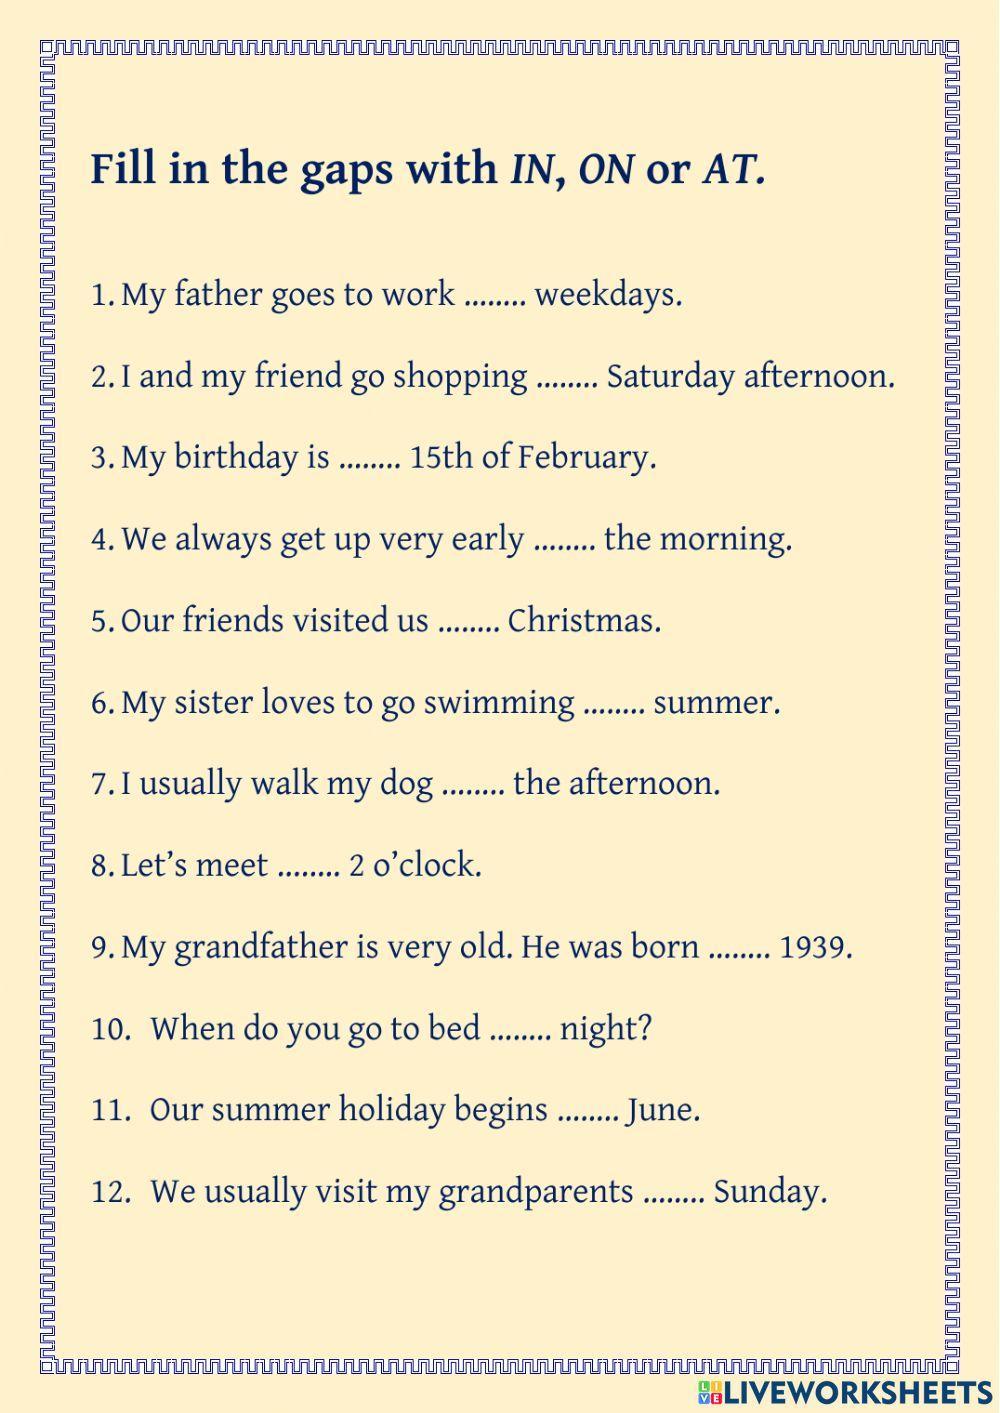 Time prepositions in, on and at